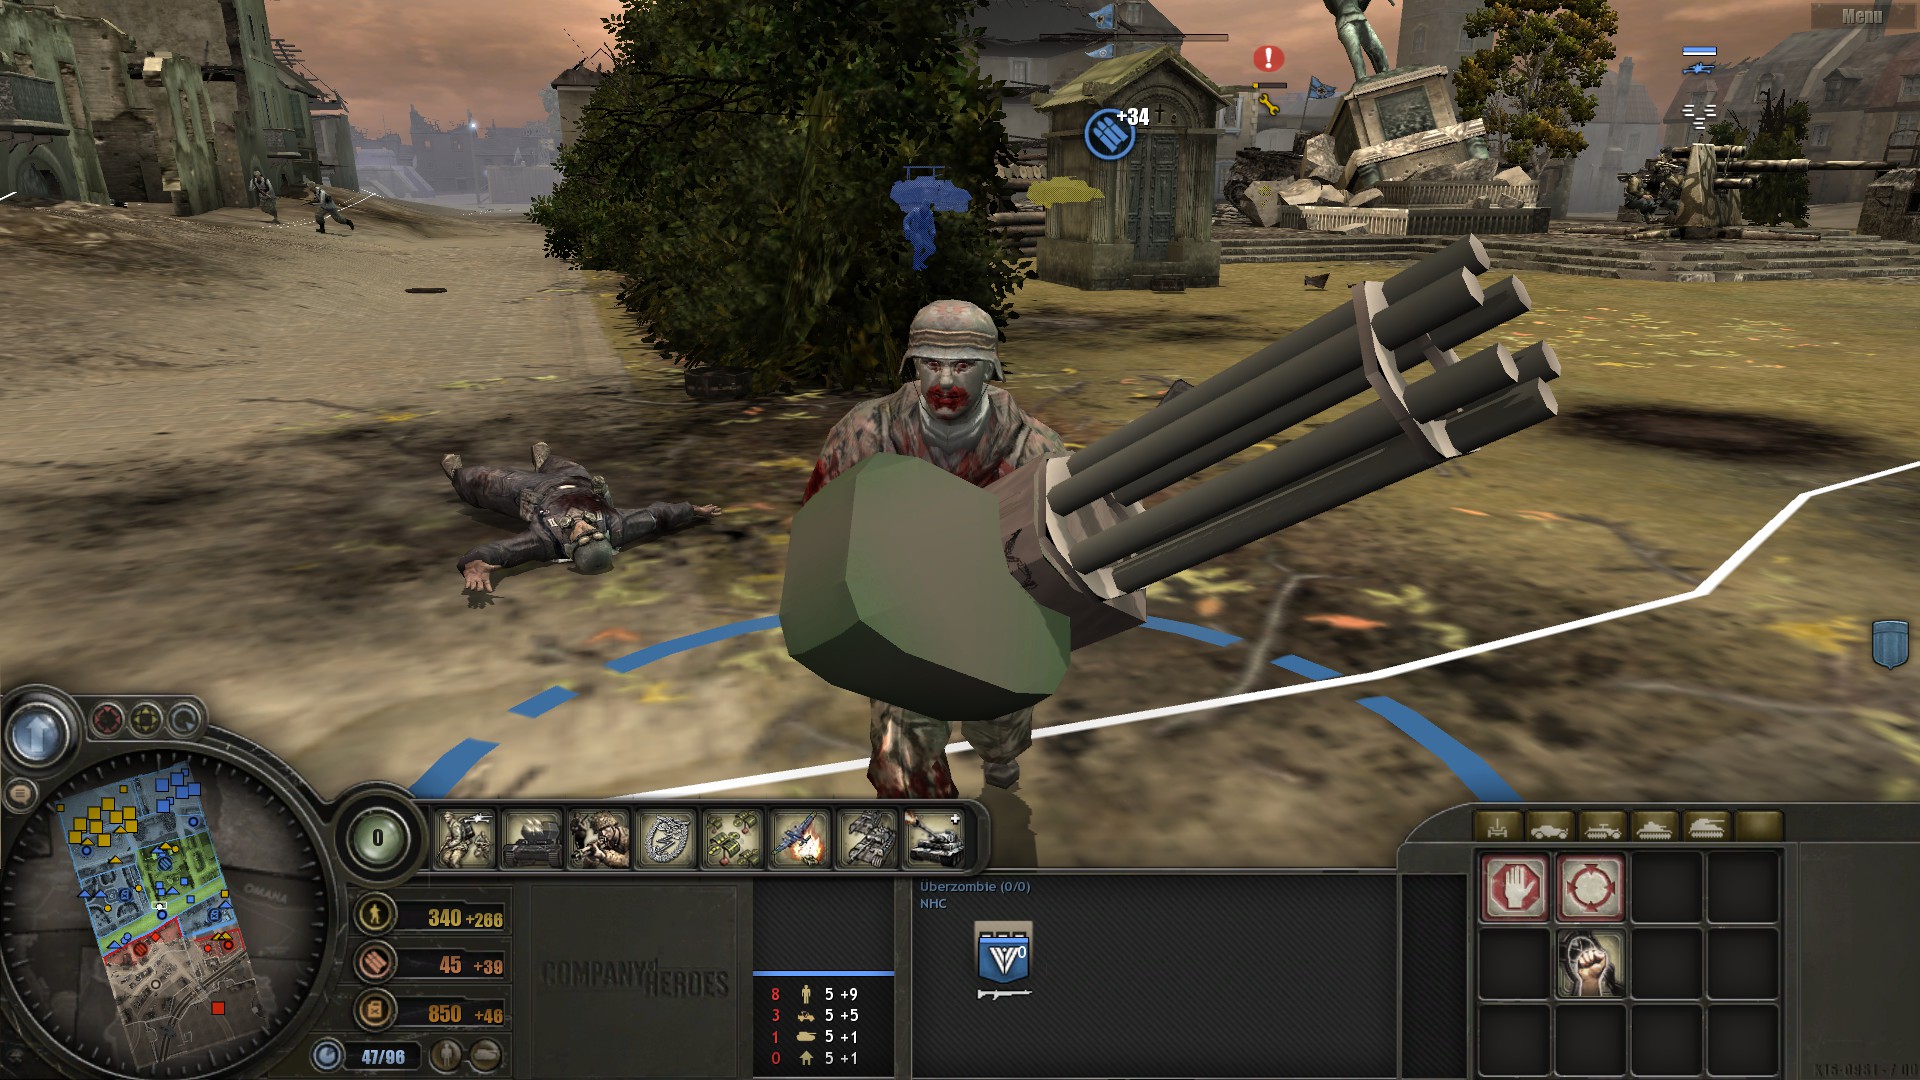 company of heroes 2 patch skirmish offline